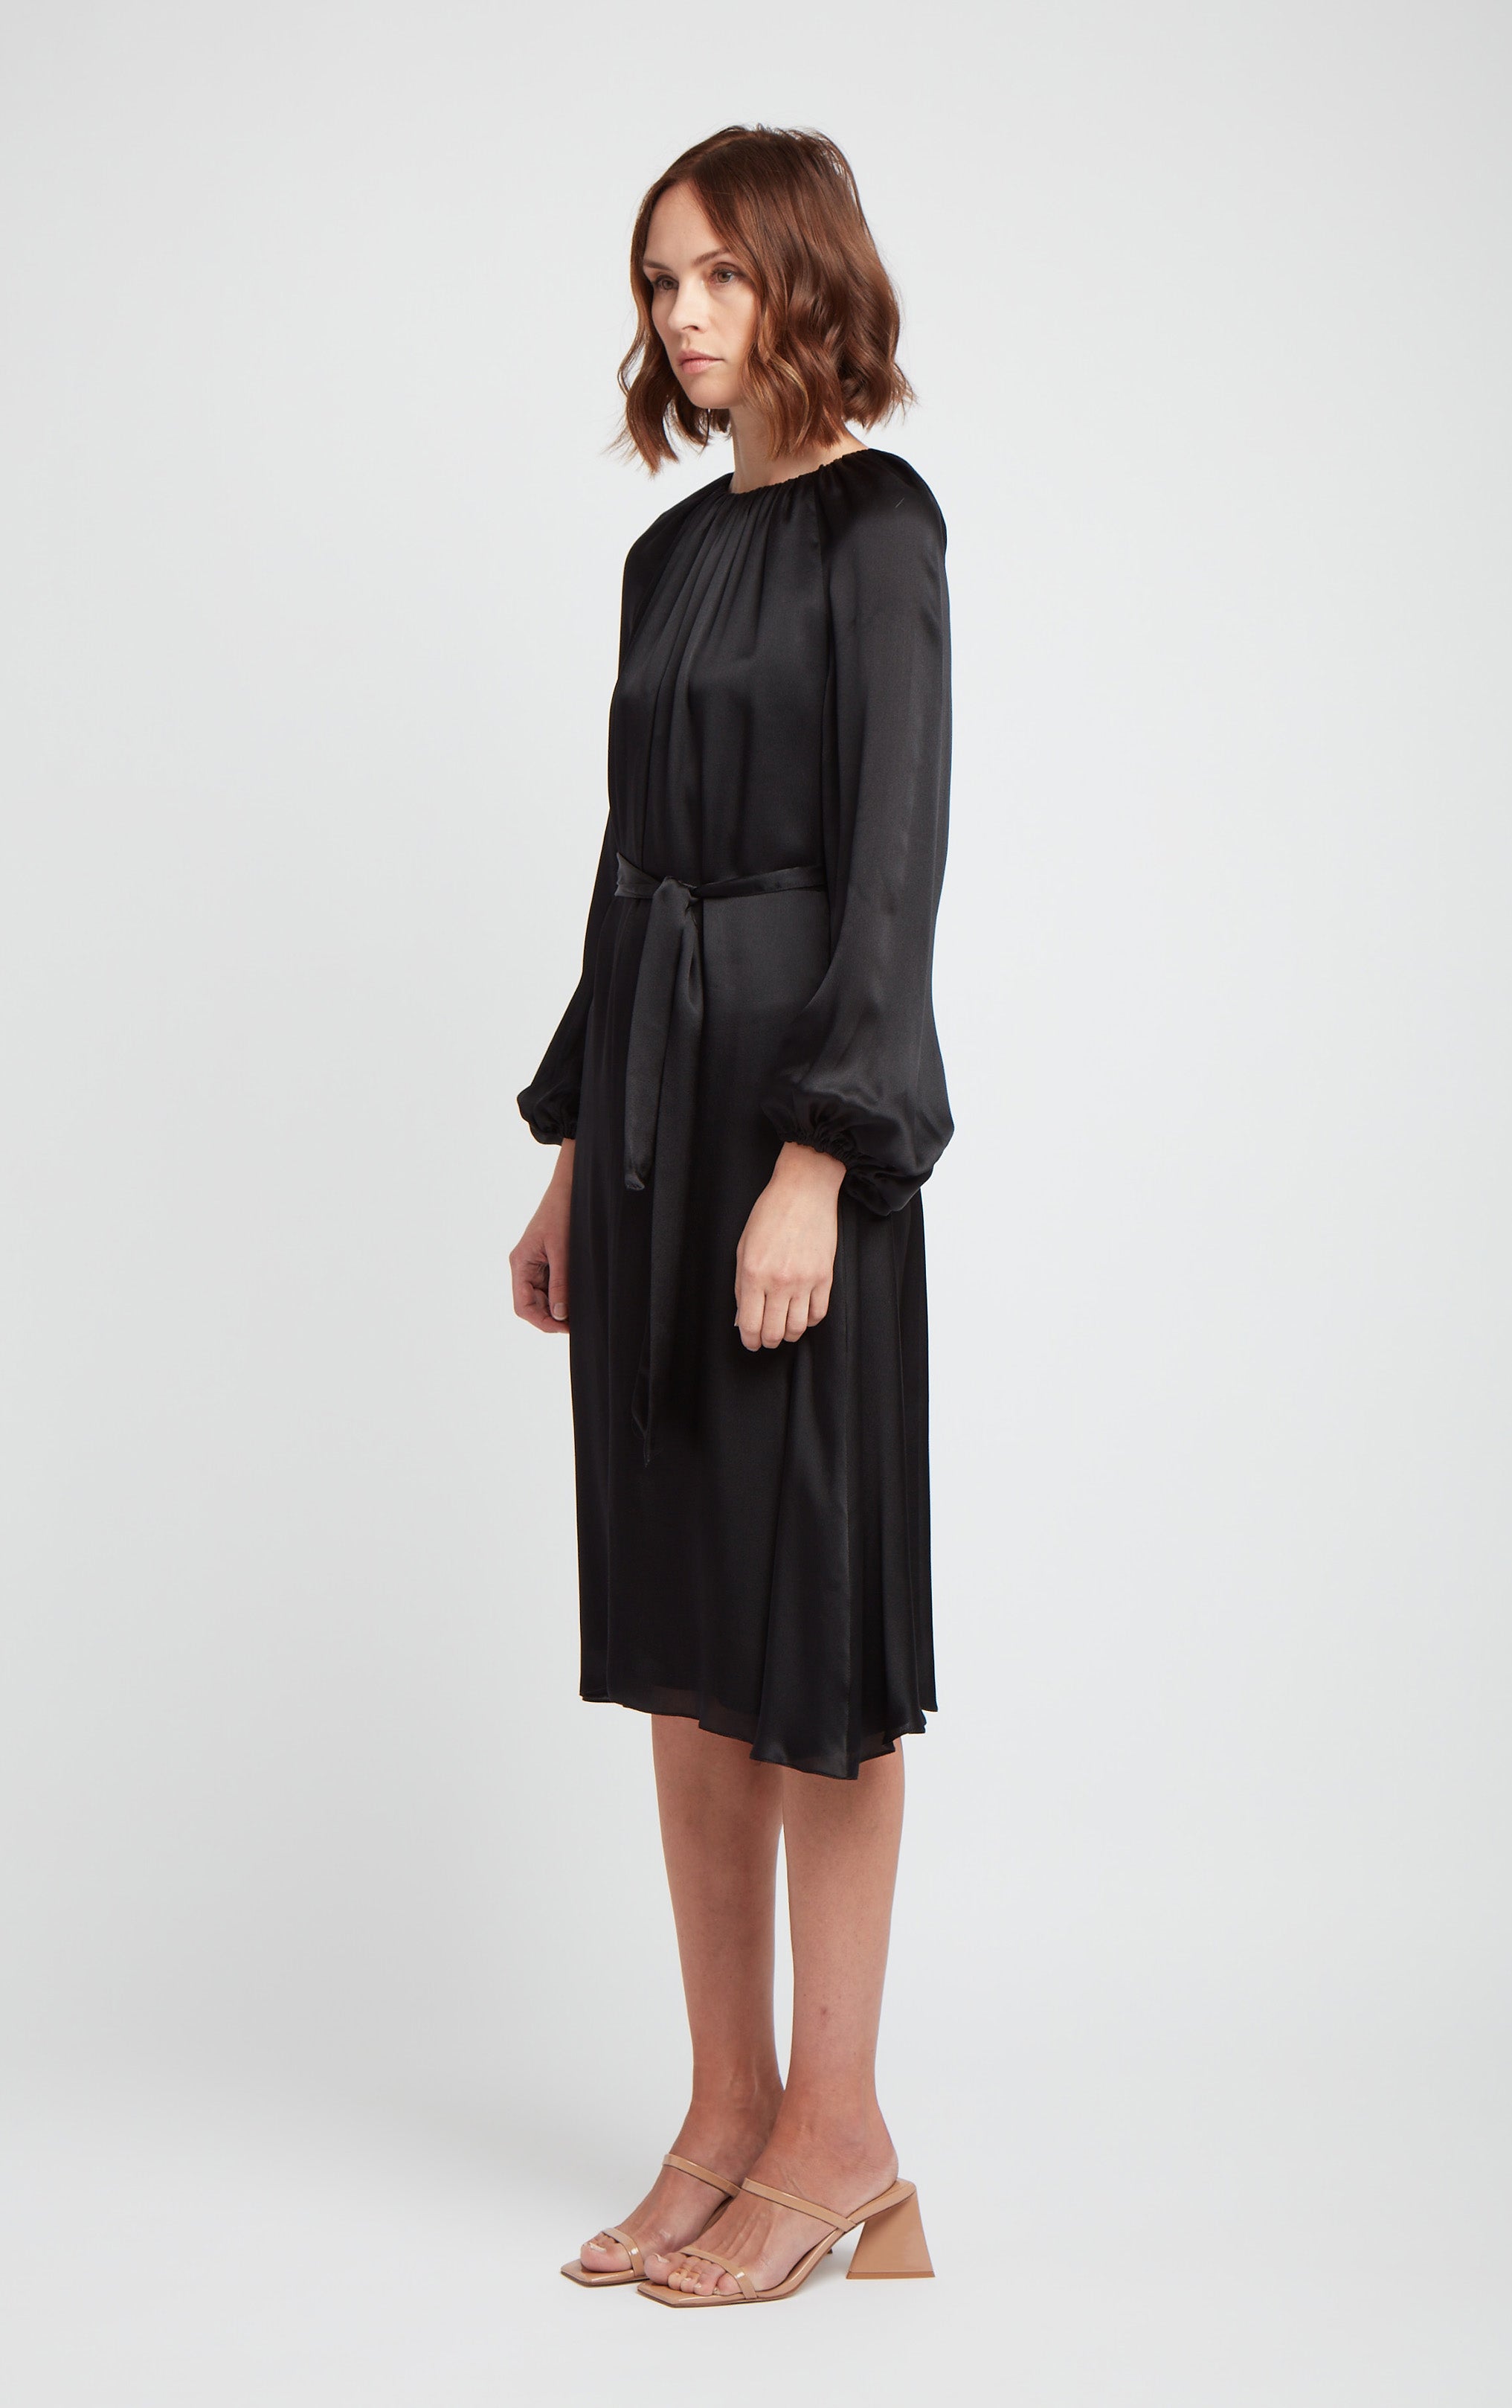 front and side view of woman wearing black puff sleeve silk dress with rusched neck